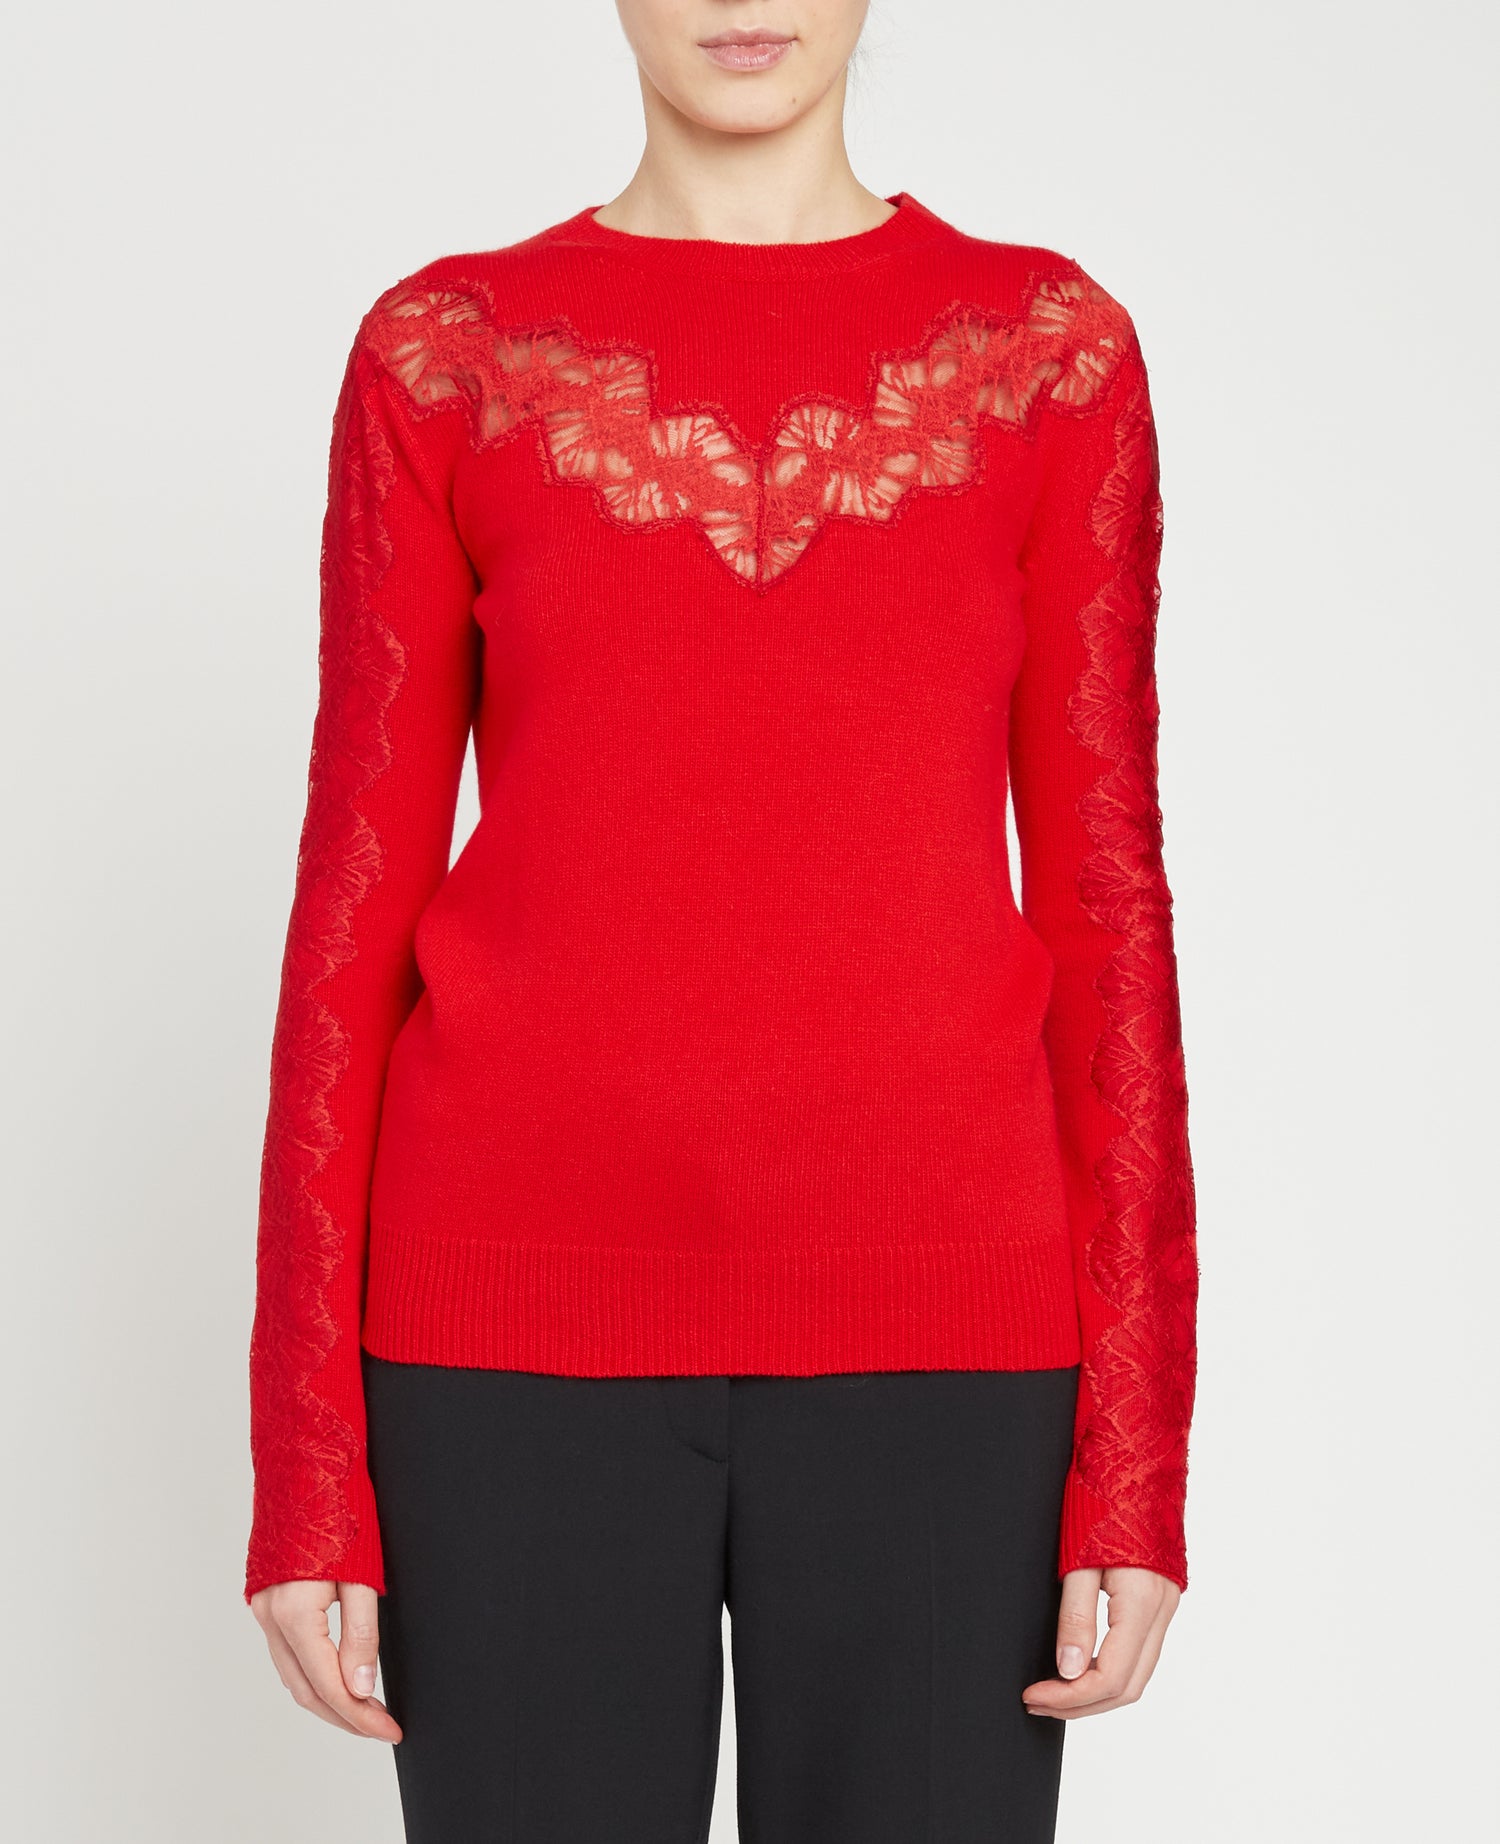 LACE DETAILED JUMPER, red